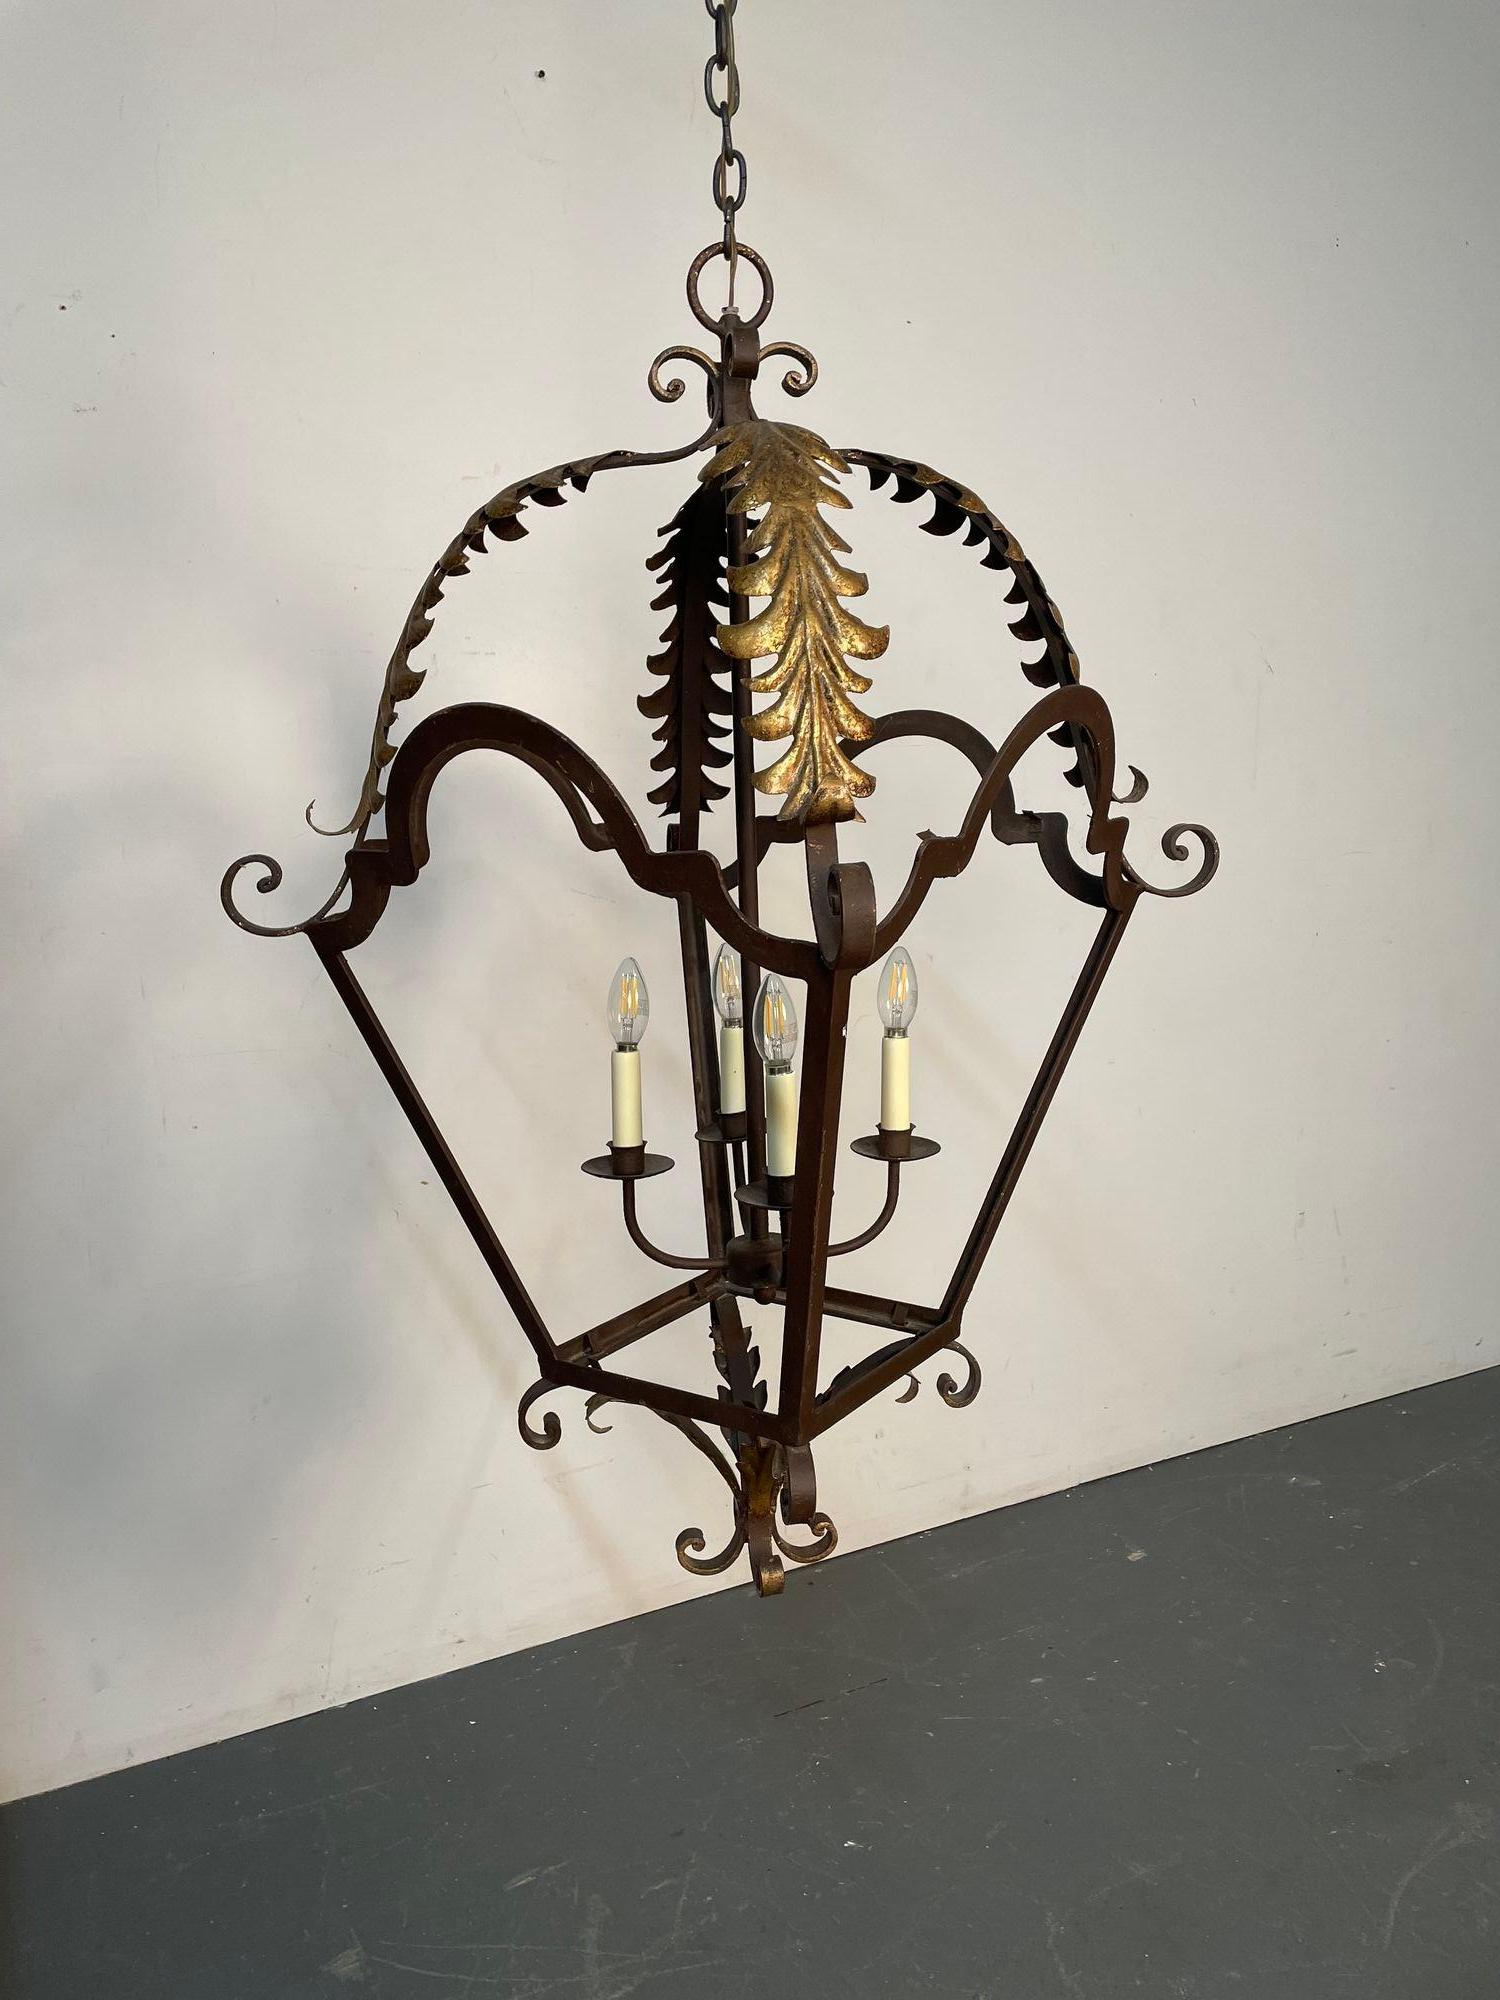 Wrought Iron and Brass Architectural Lantern Chandelier

Having a leaf and scroll form design with gilt metal or brass adornments. A large and impressive lantern having a long chain and matching canopy. The whole having an open design on all